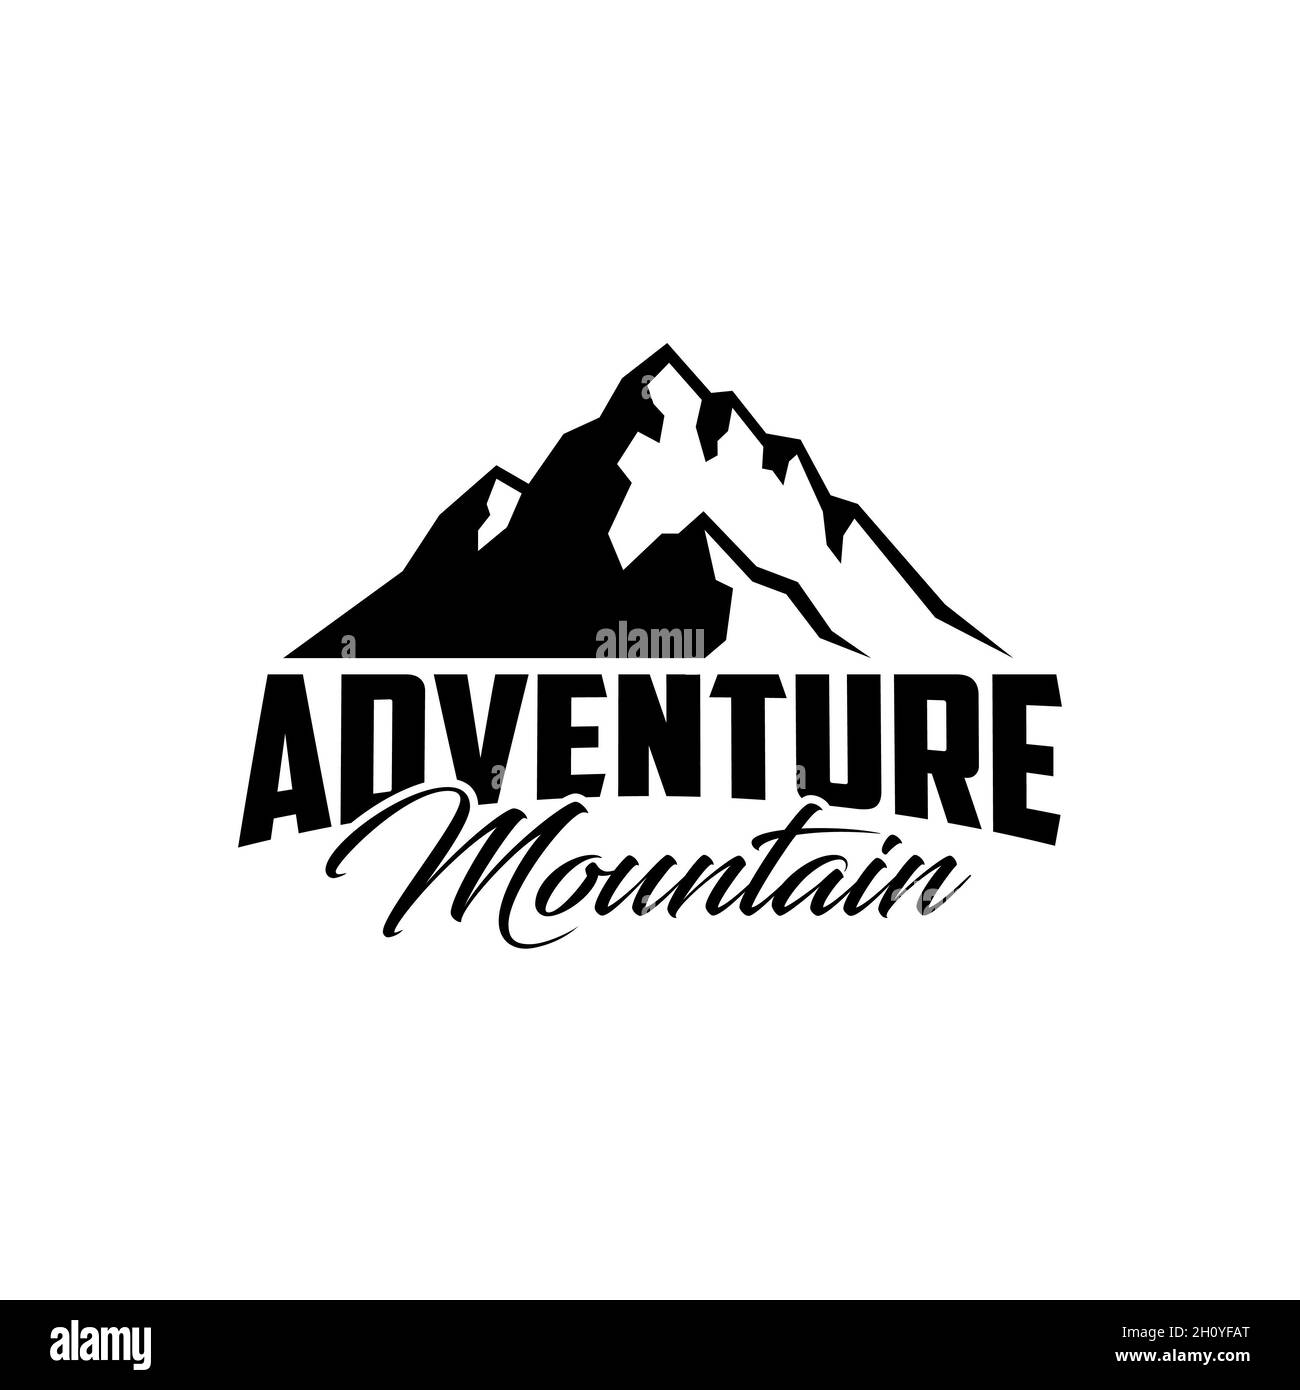 Mountain illustration with text 'Adventure Mountain', logo design related to outdoor activity Stock Photo